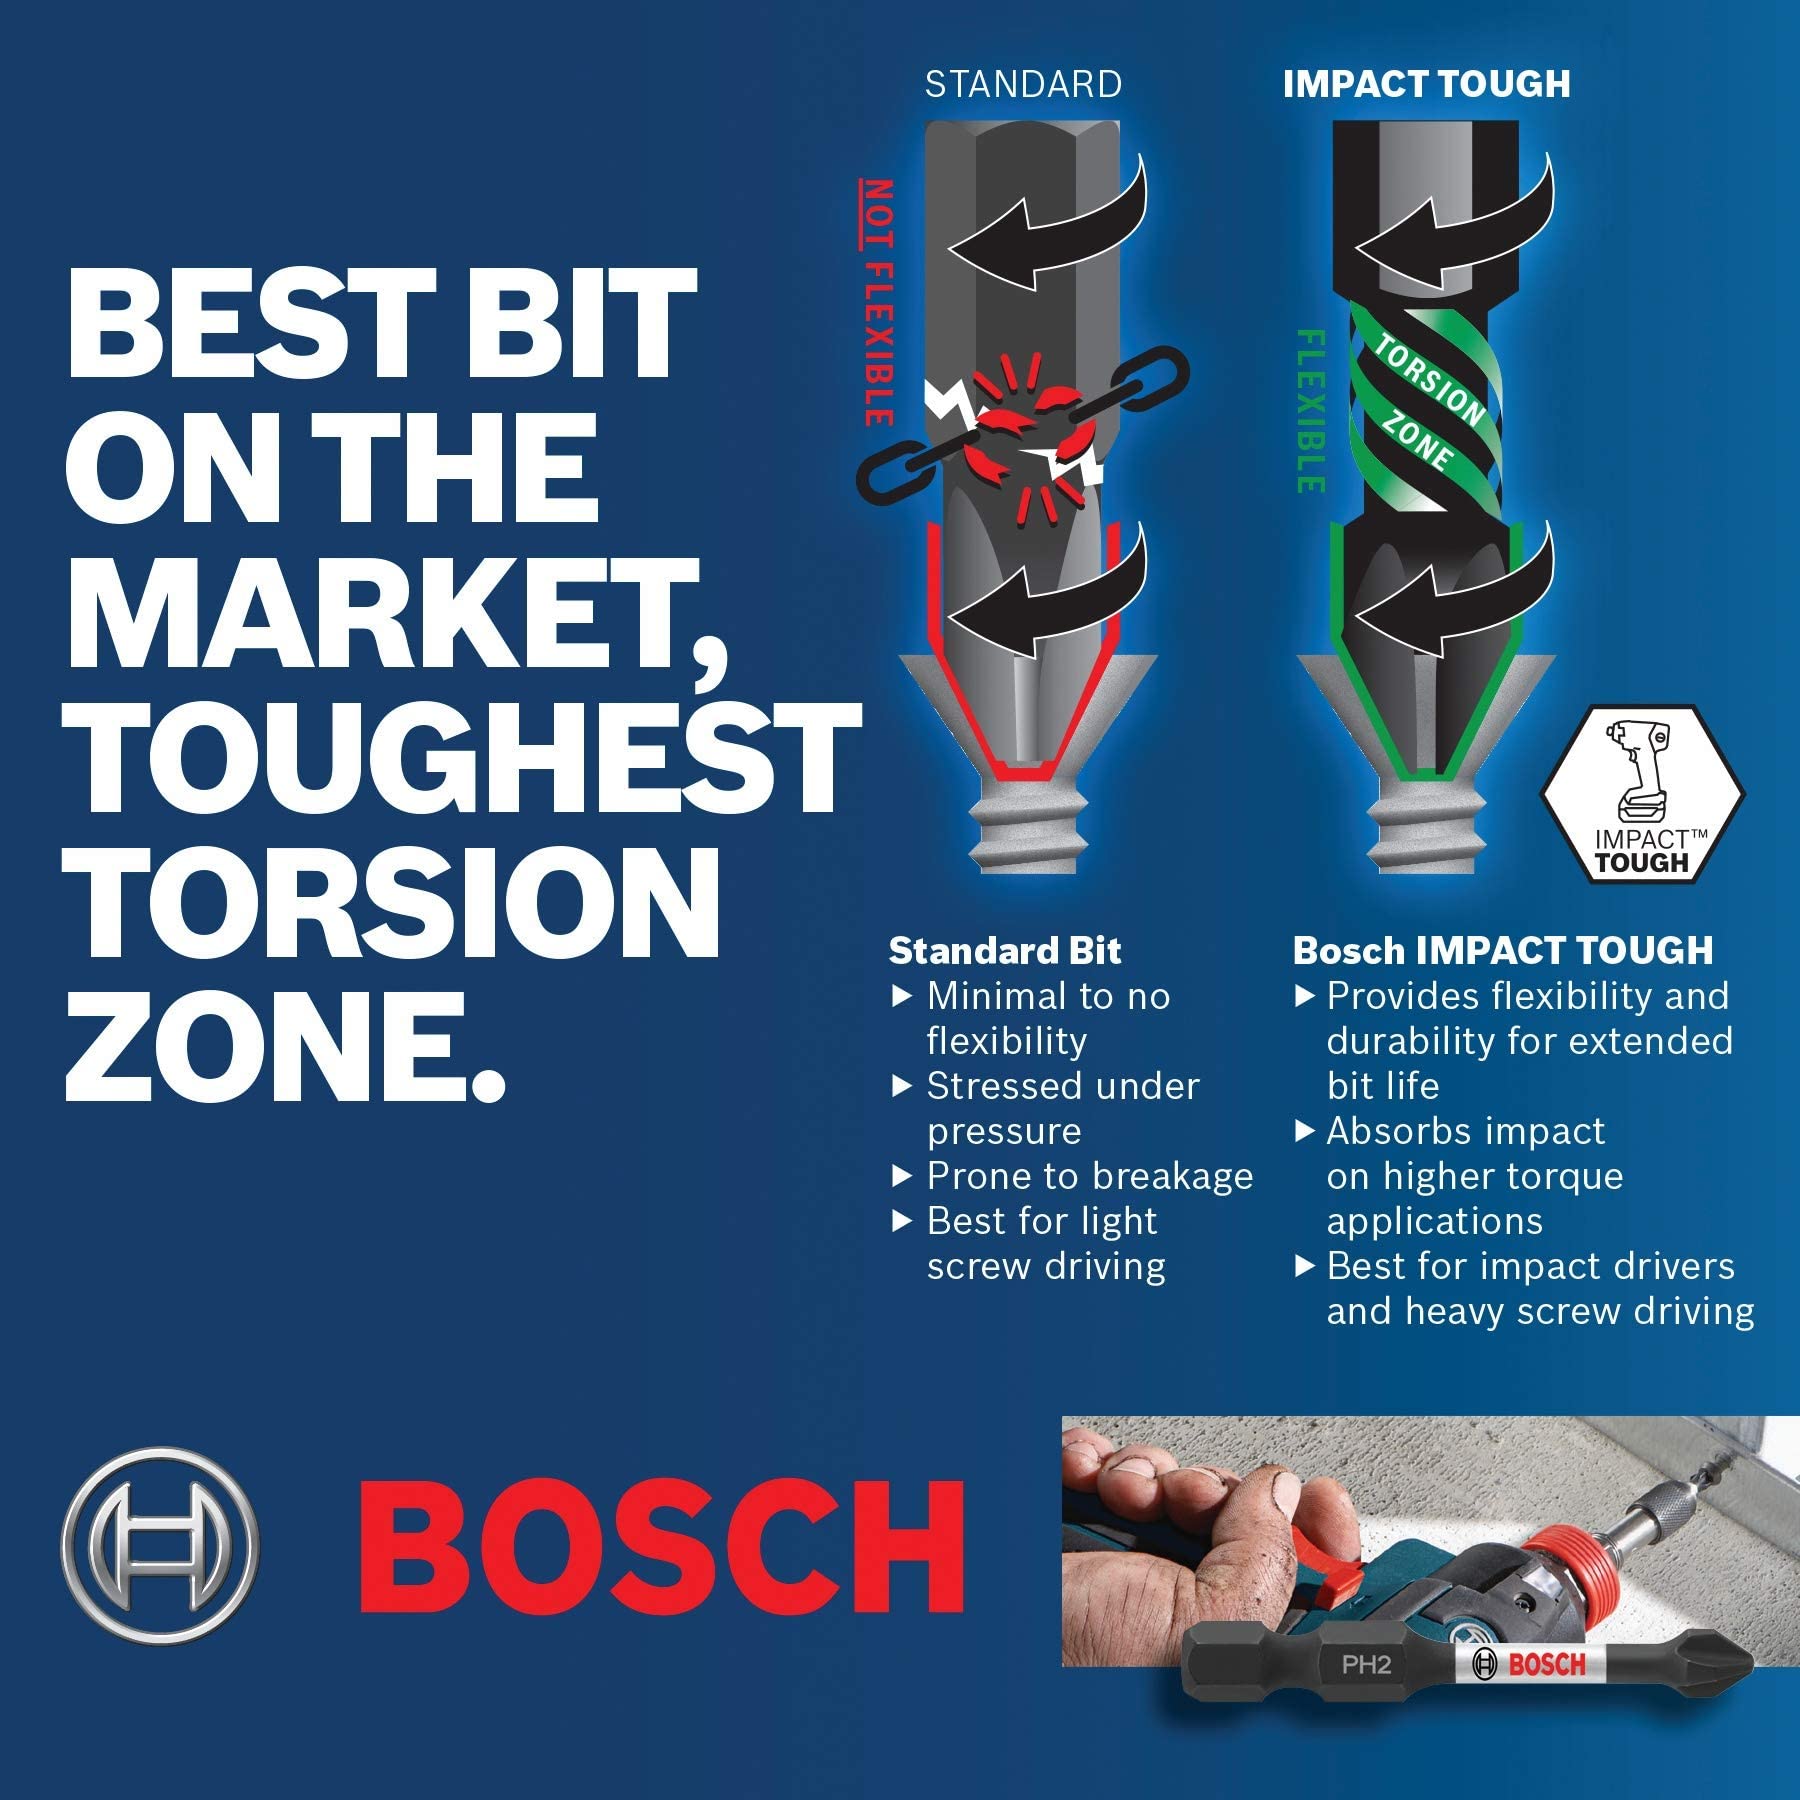 BOSCH ITBHQC201 1-Piece 2 In. Impact Tough Quick Change Bit Holder